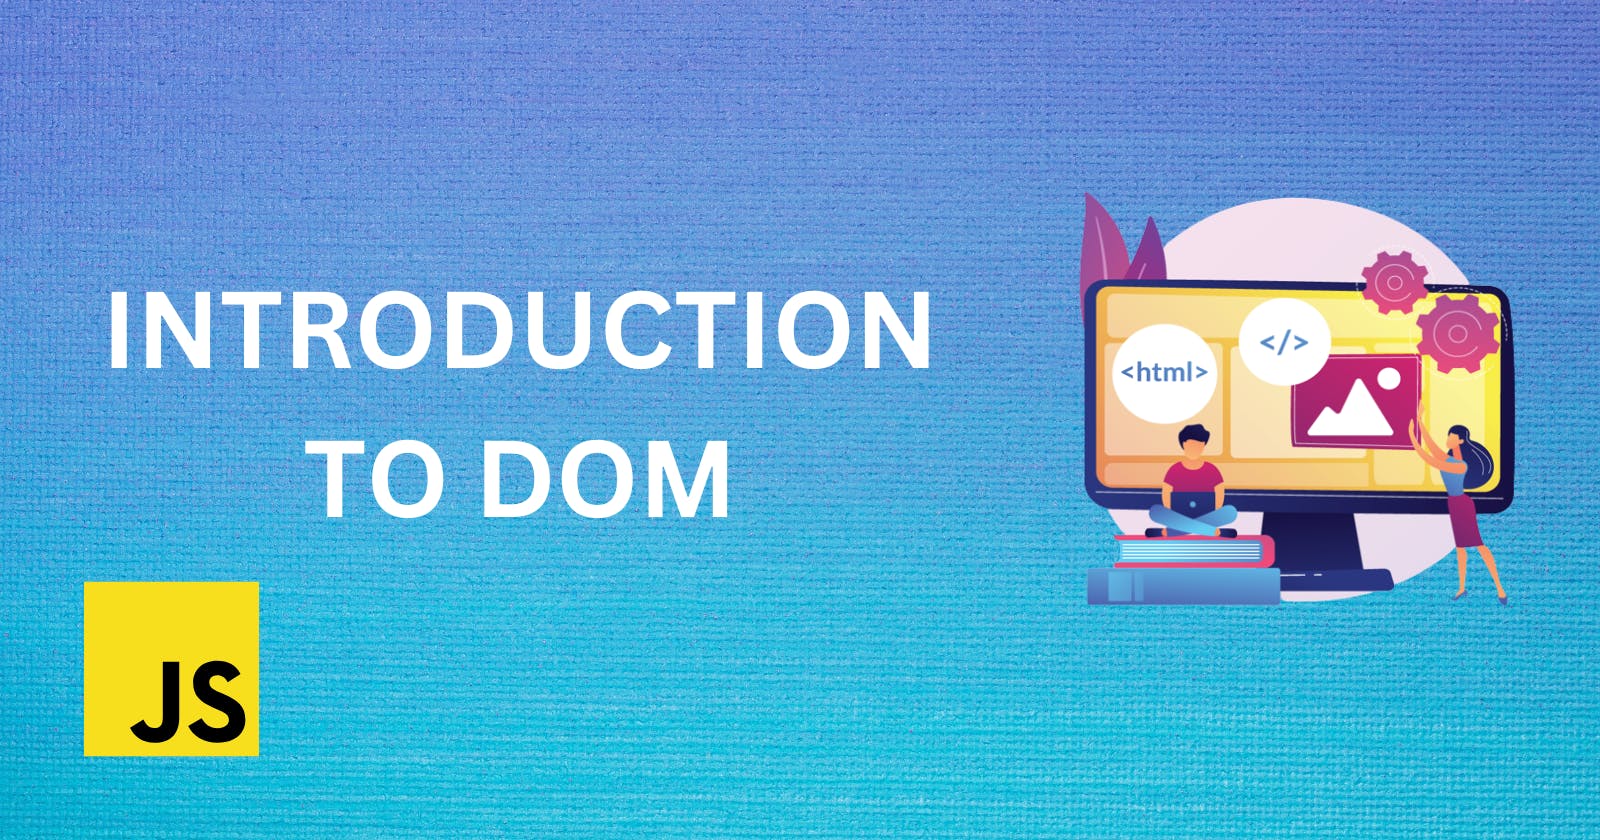 Introduction to DOM